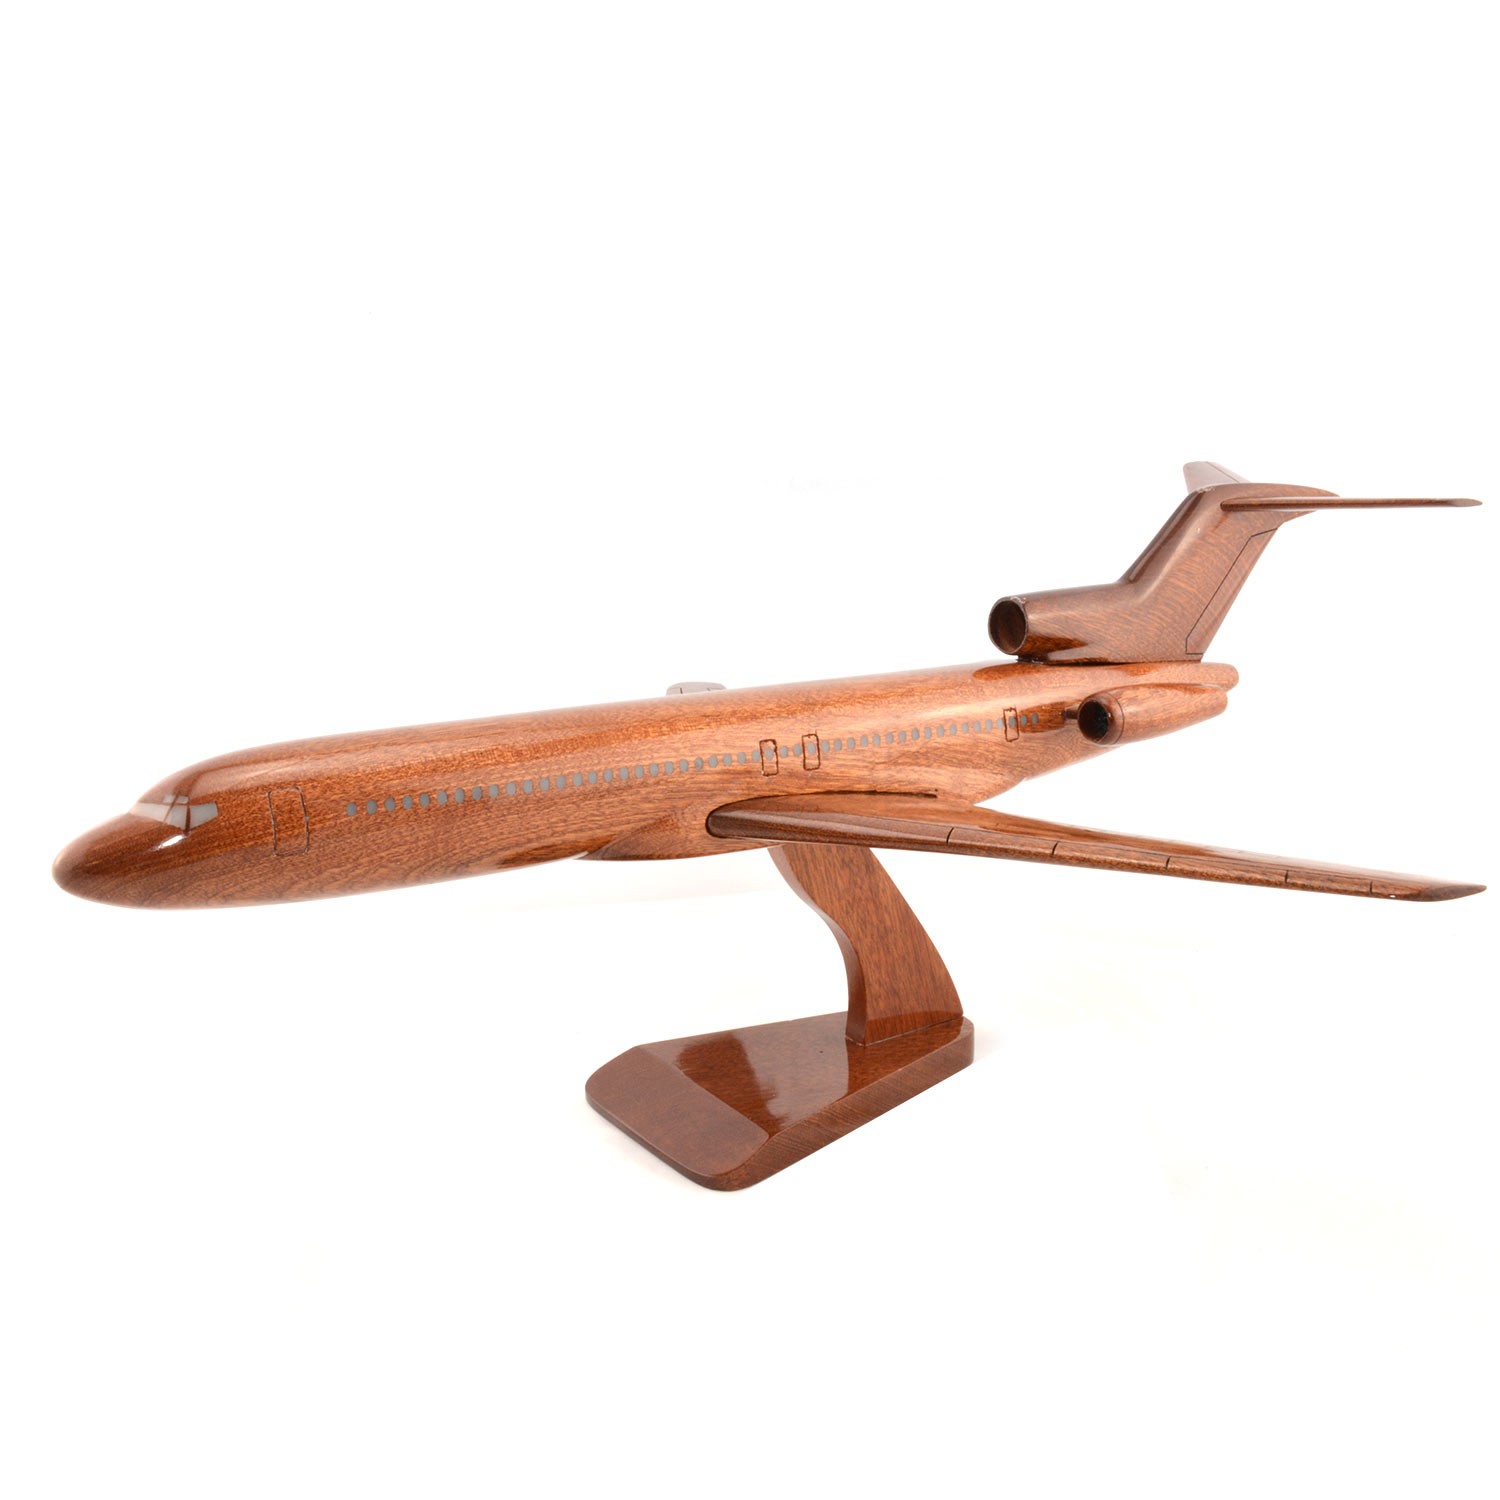 wooden model airplane